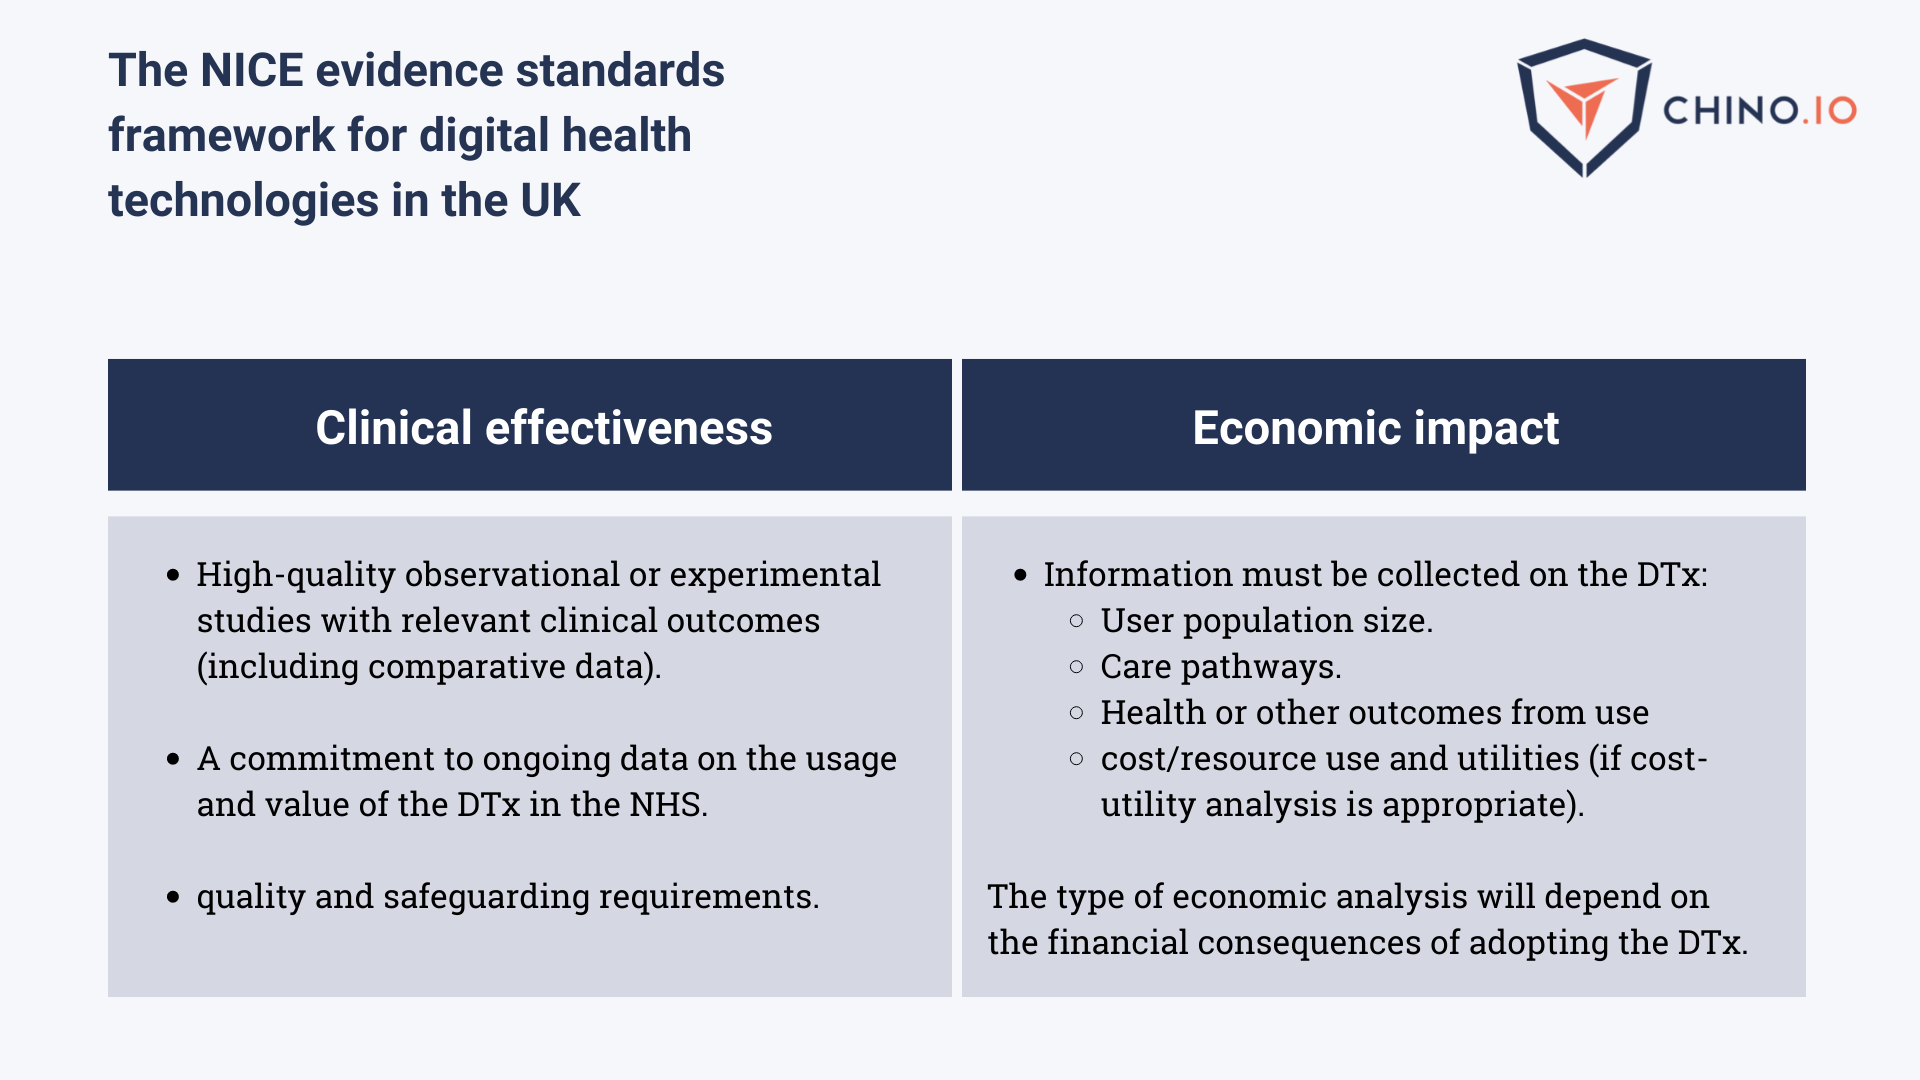 Diagram with NICE evidence standards in the UK for digital health technologies and DTx